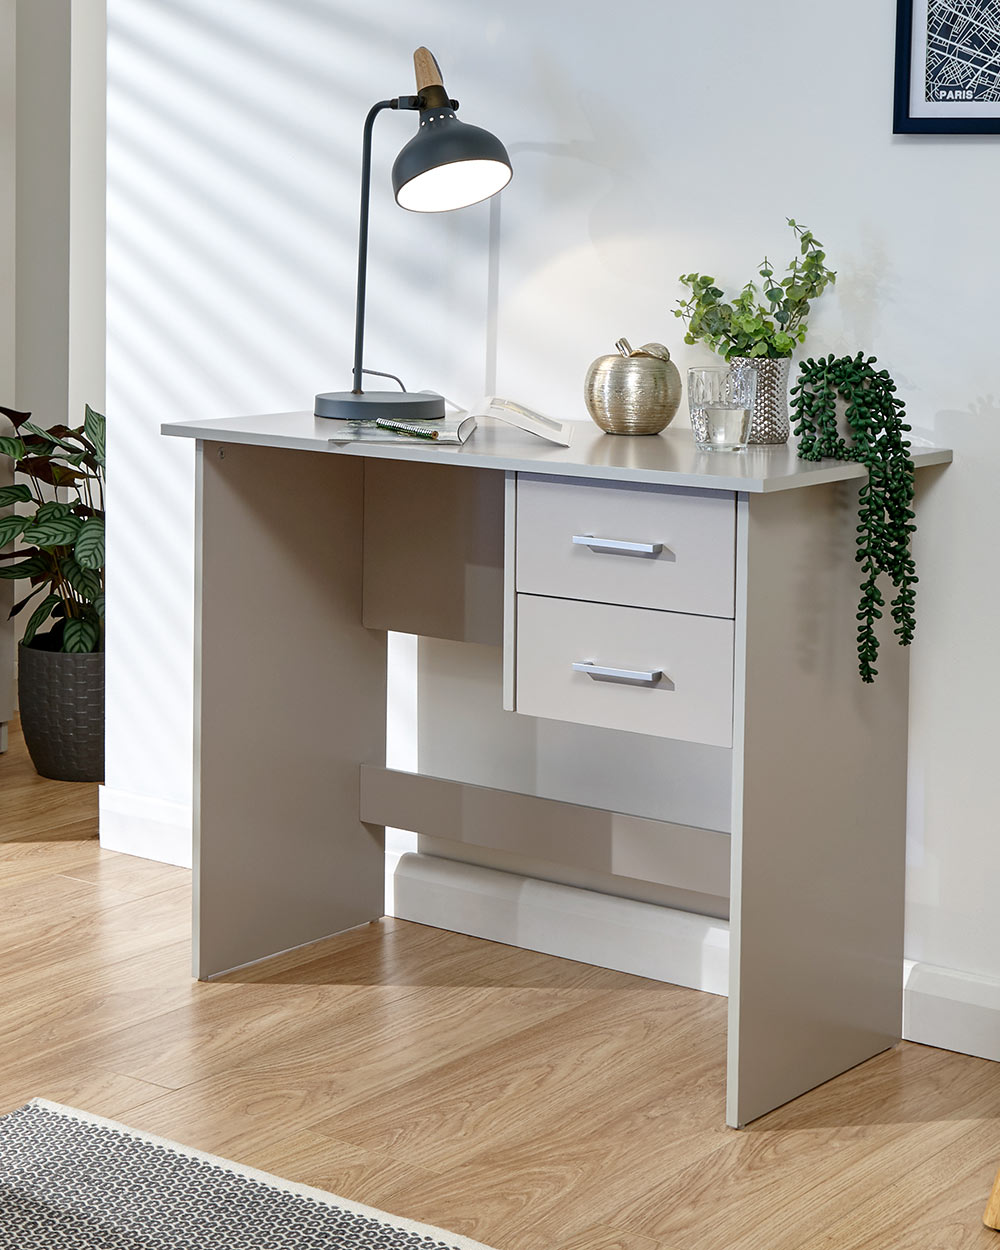 Panama desk in grey in a lifestyle photo in a room